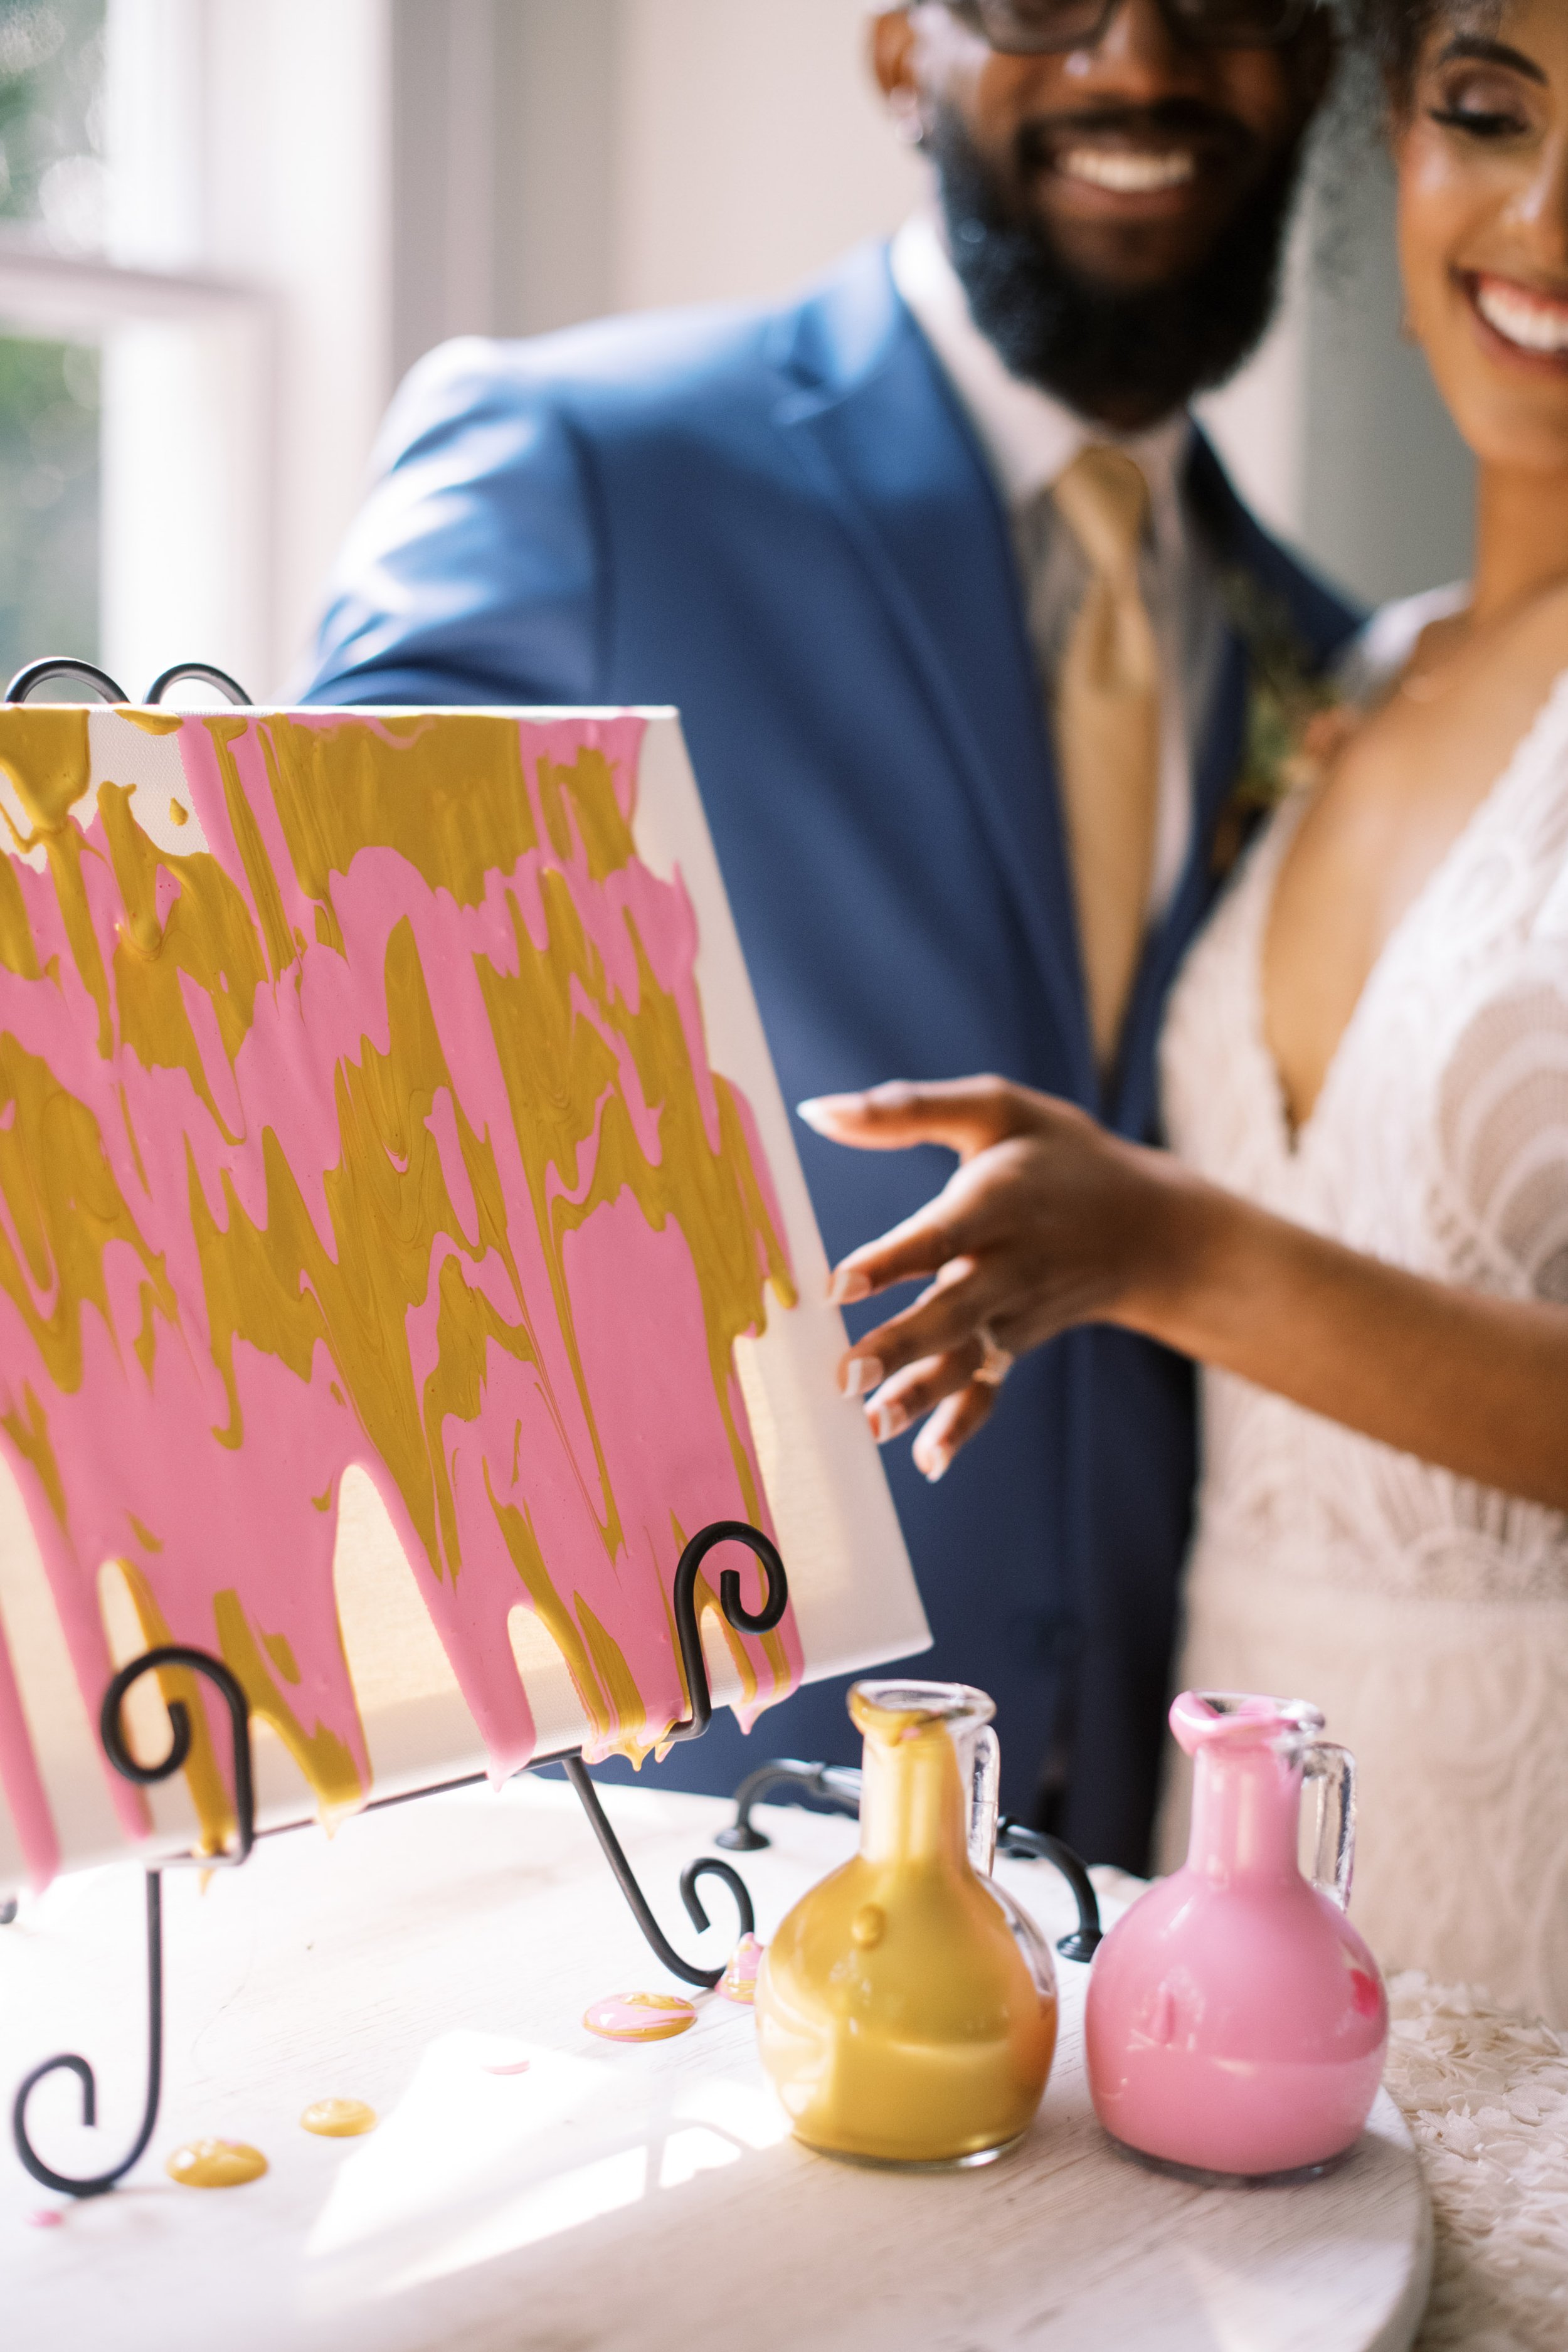 Painting Ceremony The McAlister-Leftwich House Wedding Venue Fancy This Photography